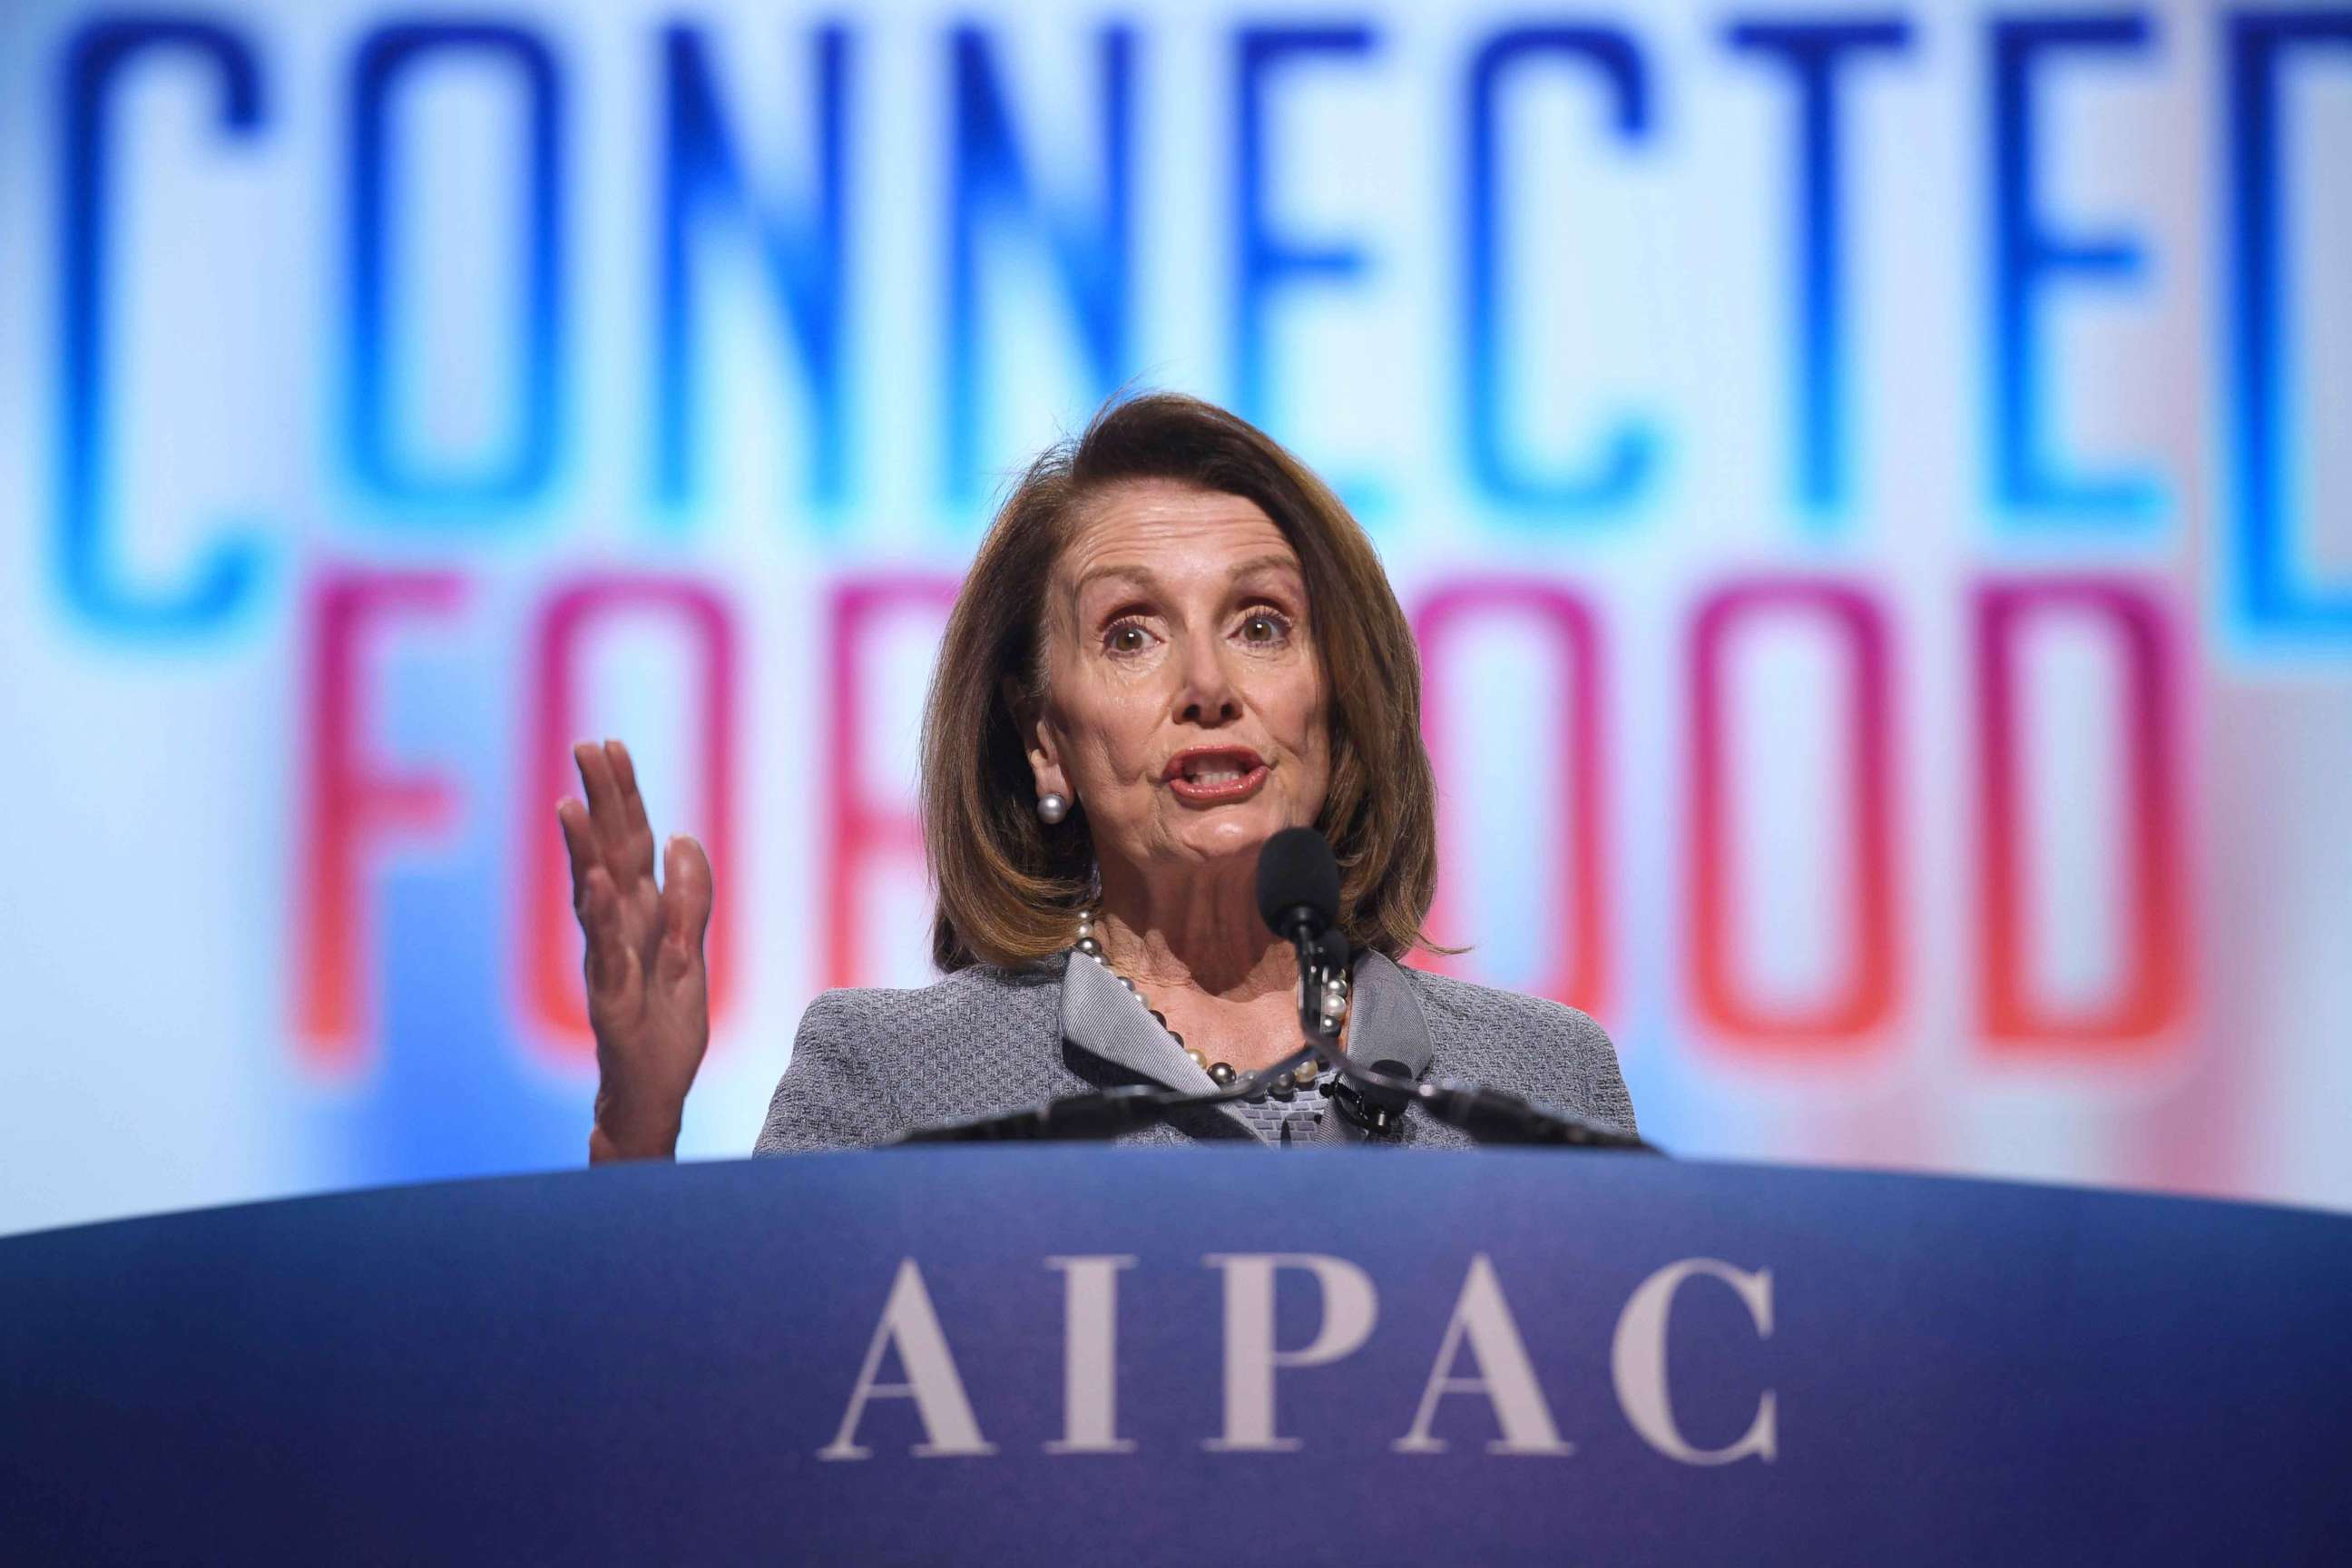 PHOTO: Speaker of the House Nancy Pelosi speaks during the AIPAC annual meeting in Washington, DC, March 26, 2019.